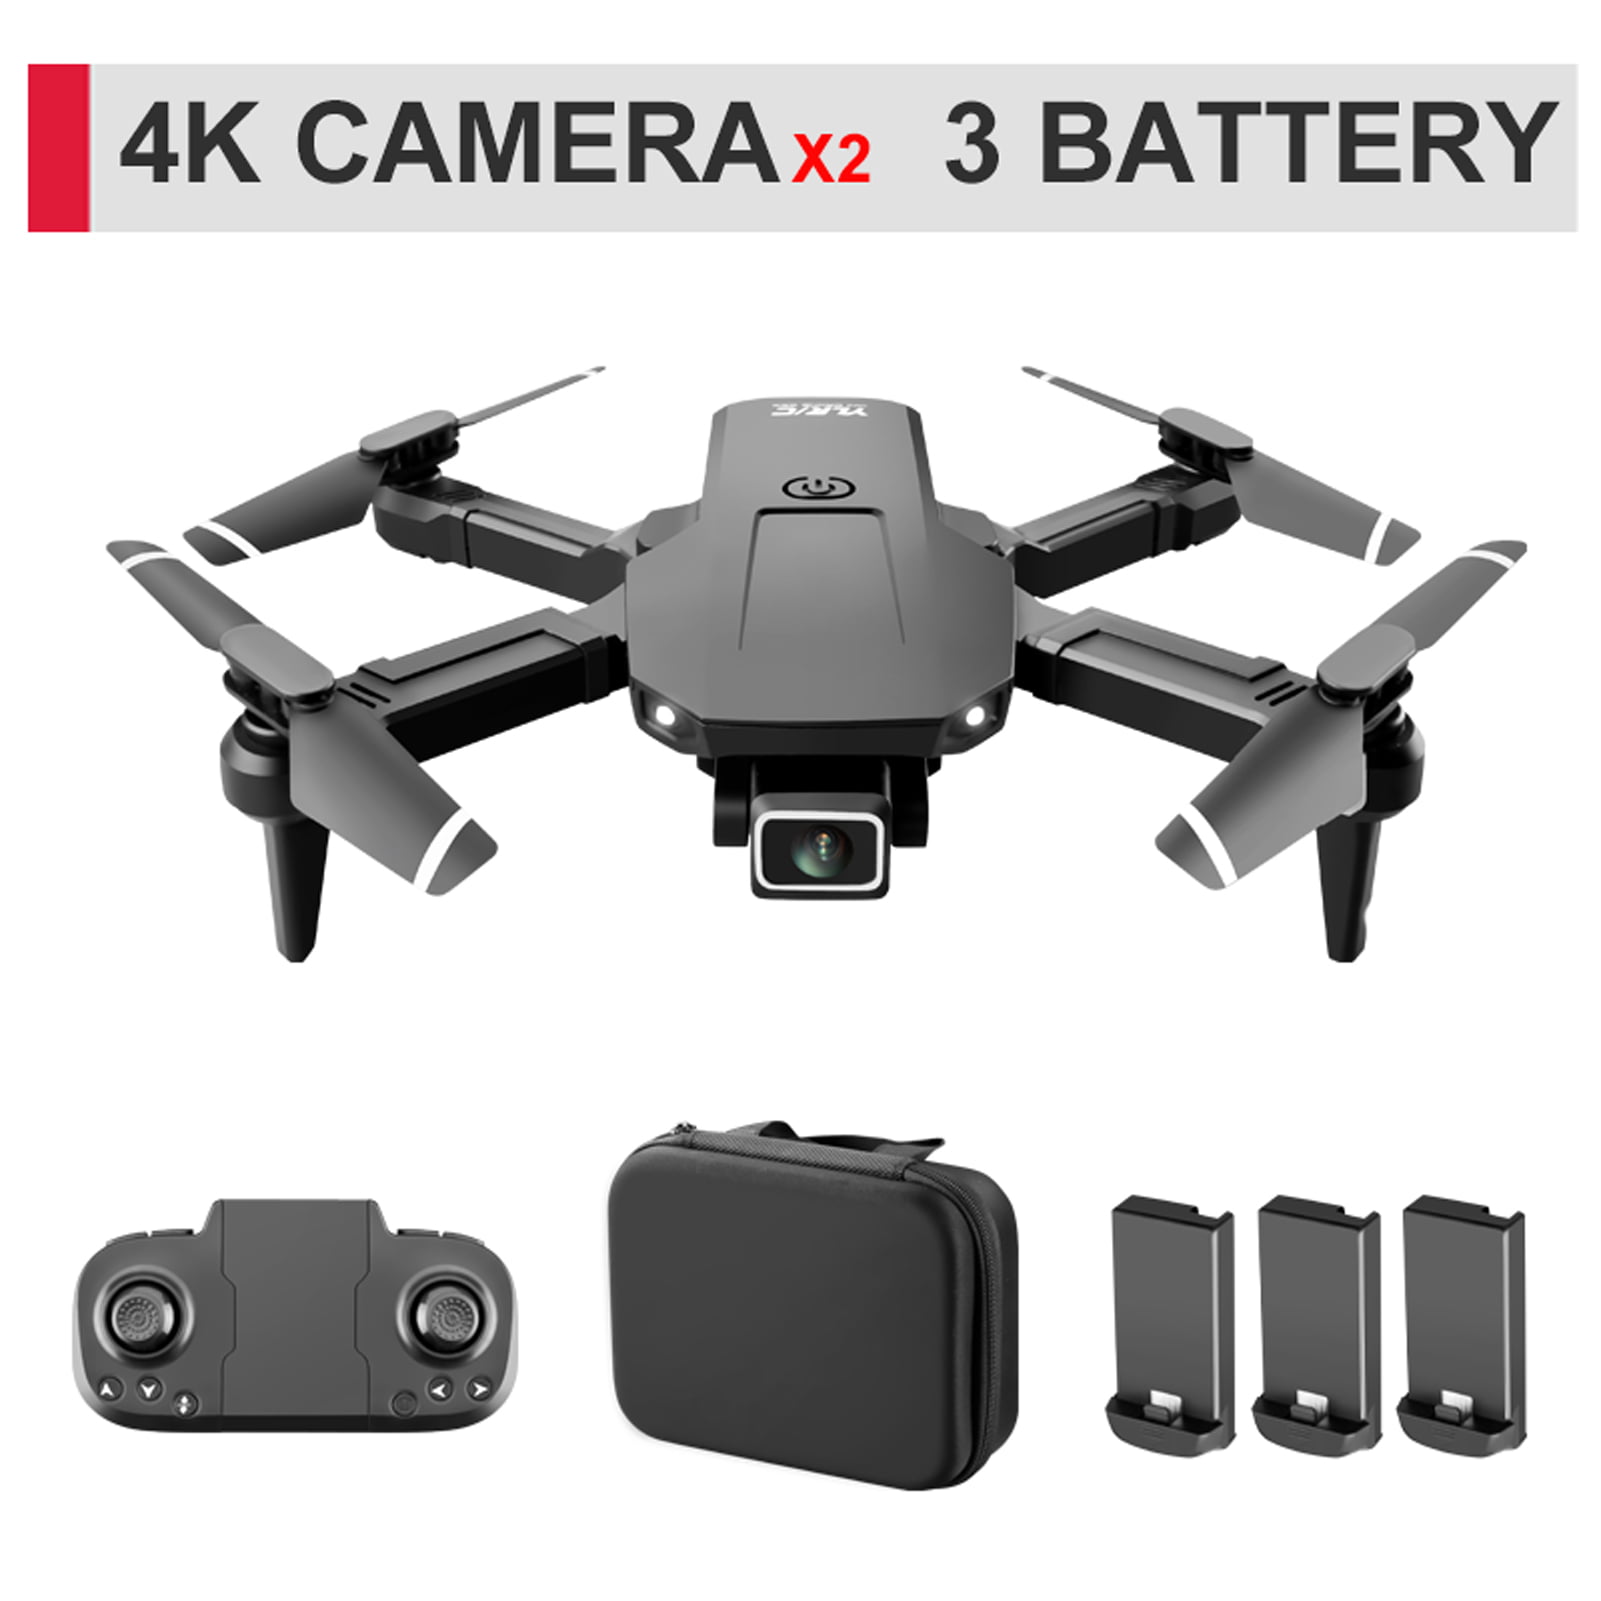 KF608 RC Drone for Beginner Mini RC Drone Quadcopter with 2 Battery E1V2 